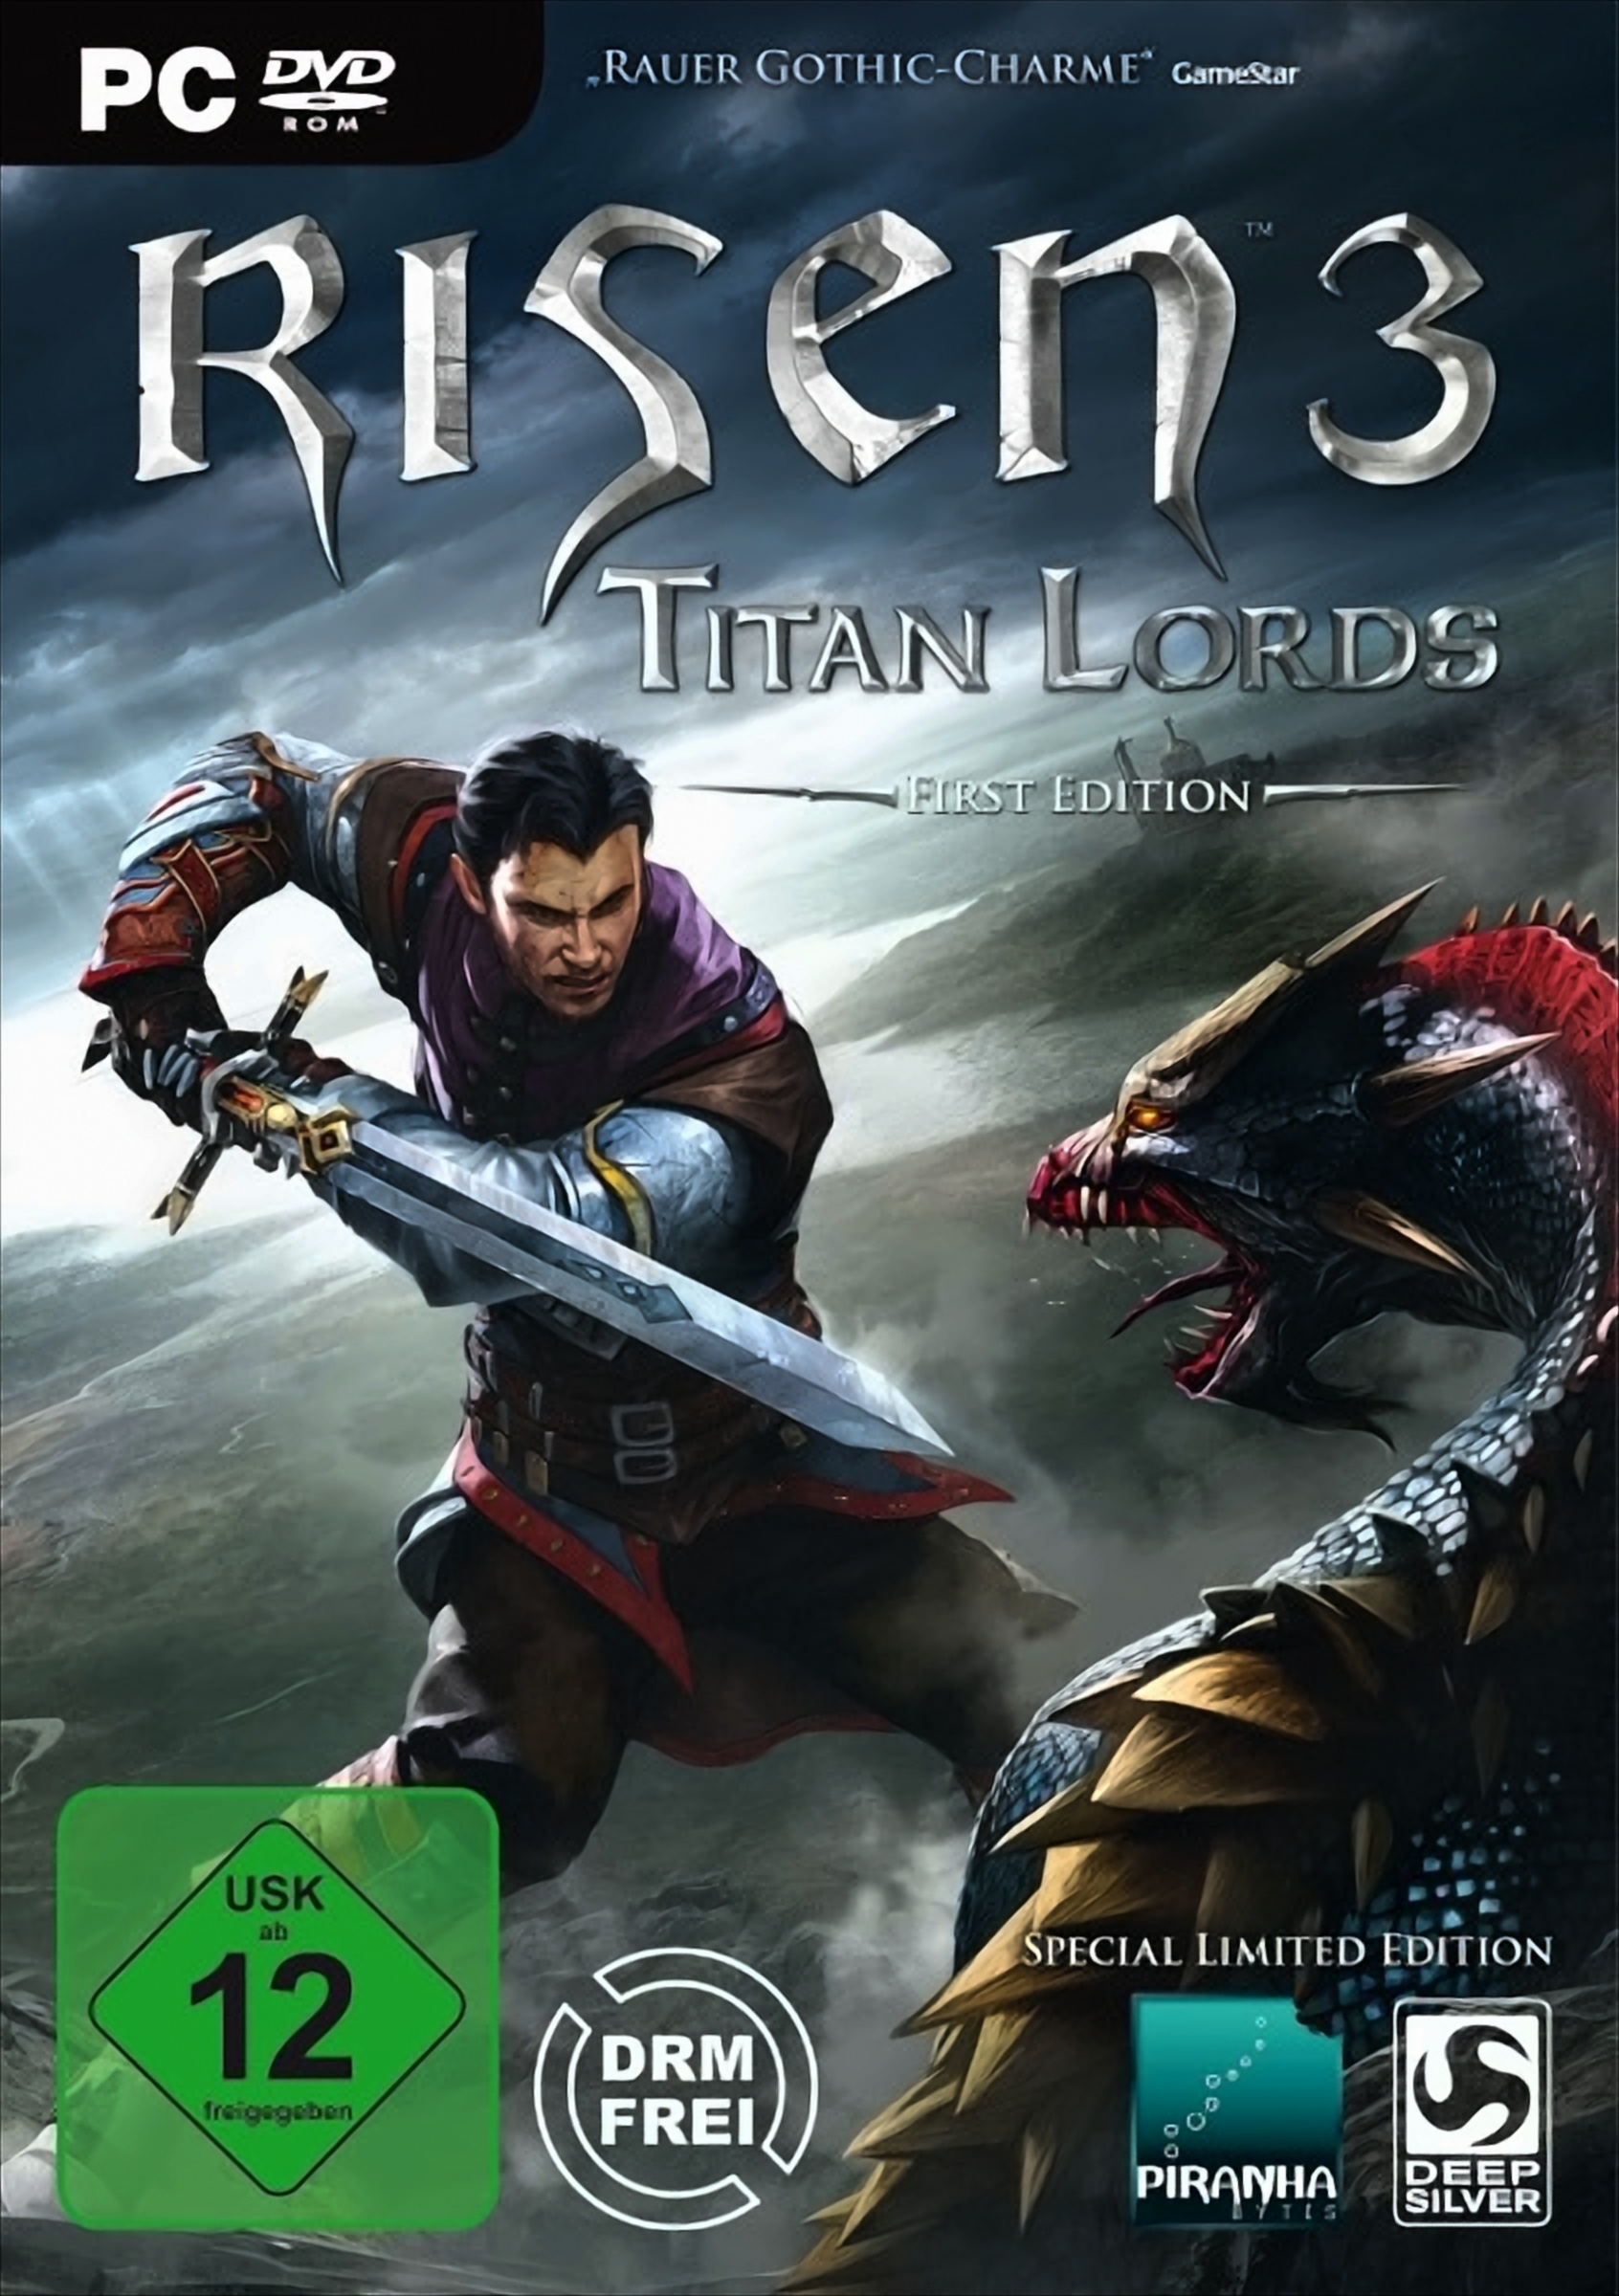 Risen 3: Special Edition Limited Titan Lords (PC) (USK) - [PC